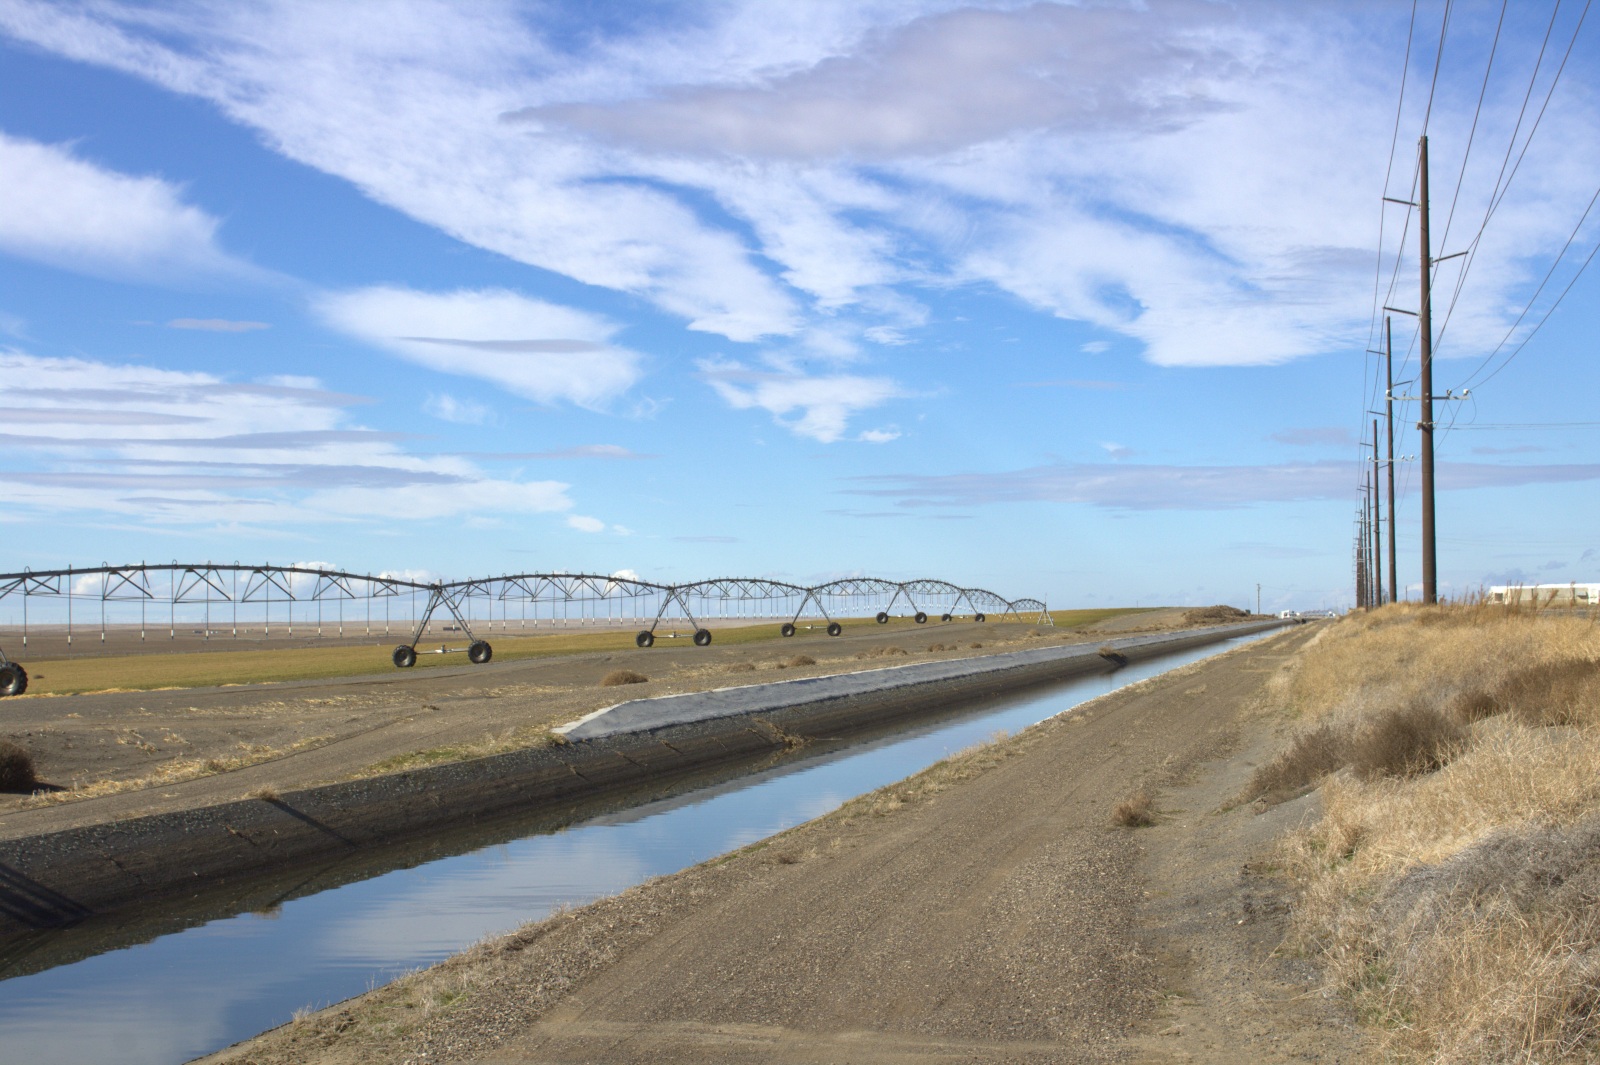 Three Decades of Well Water Pollution in Rural Oregon Sees Almost No Government Action